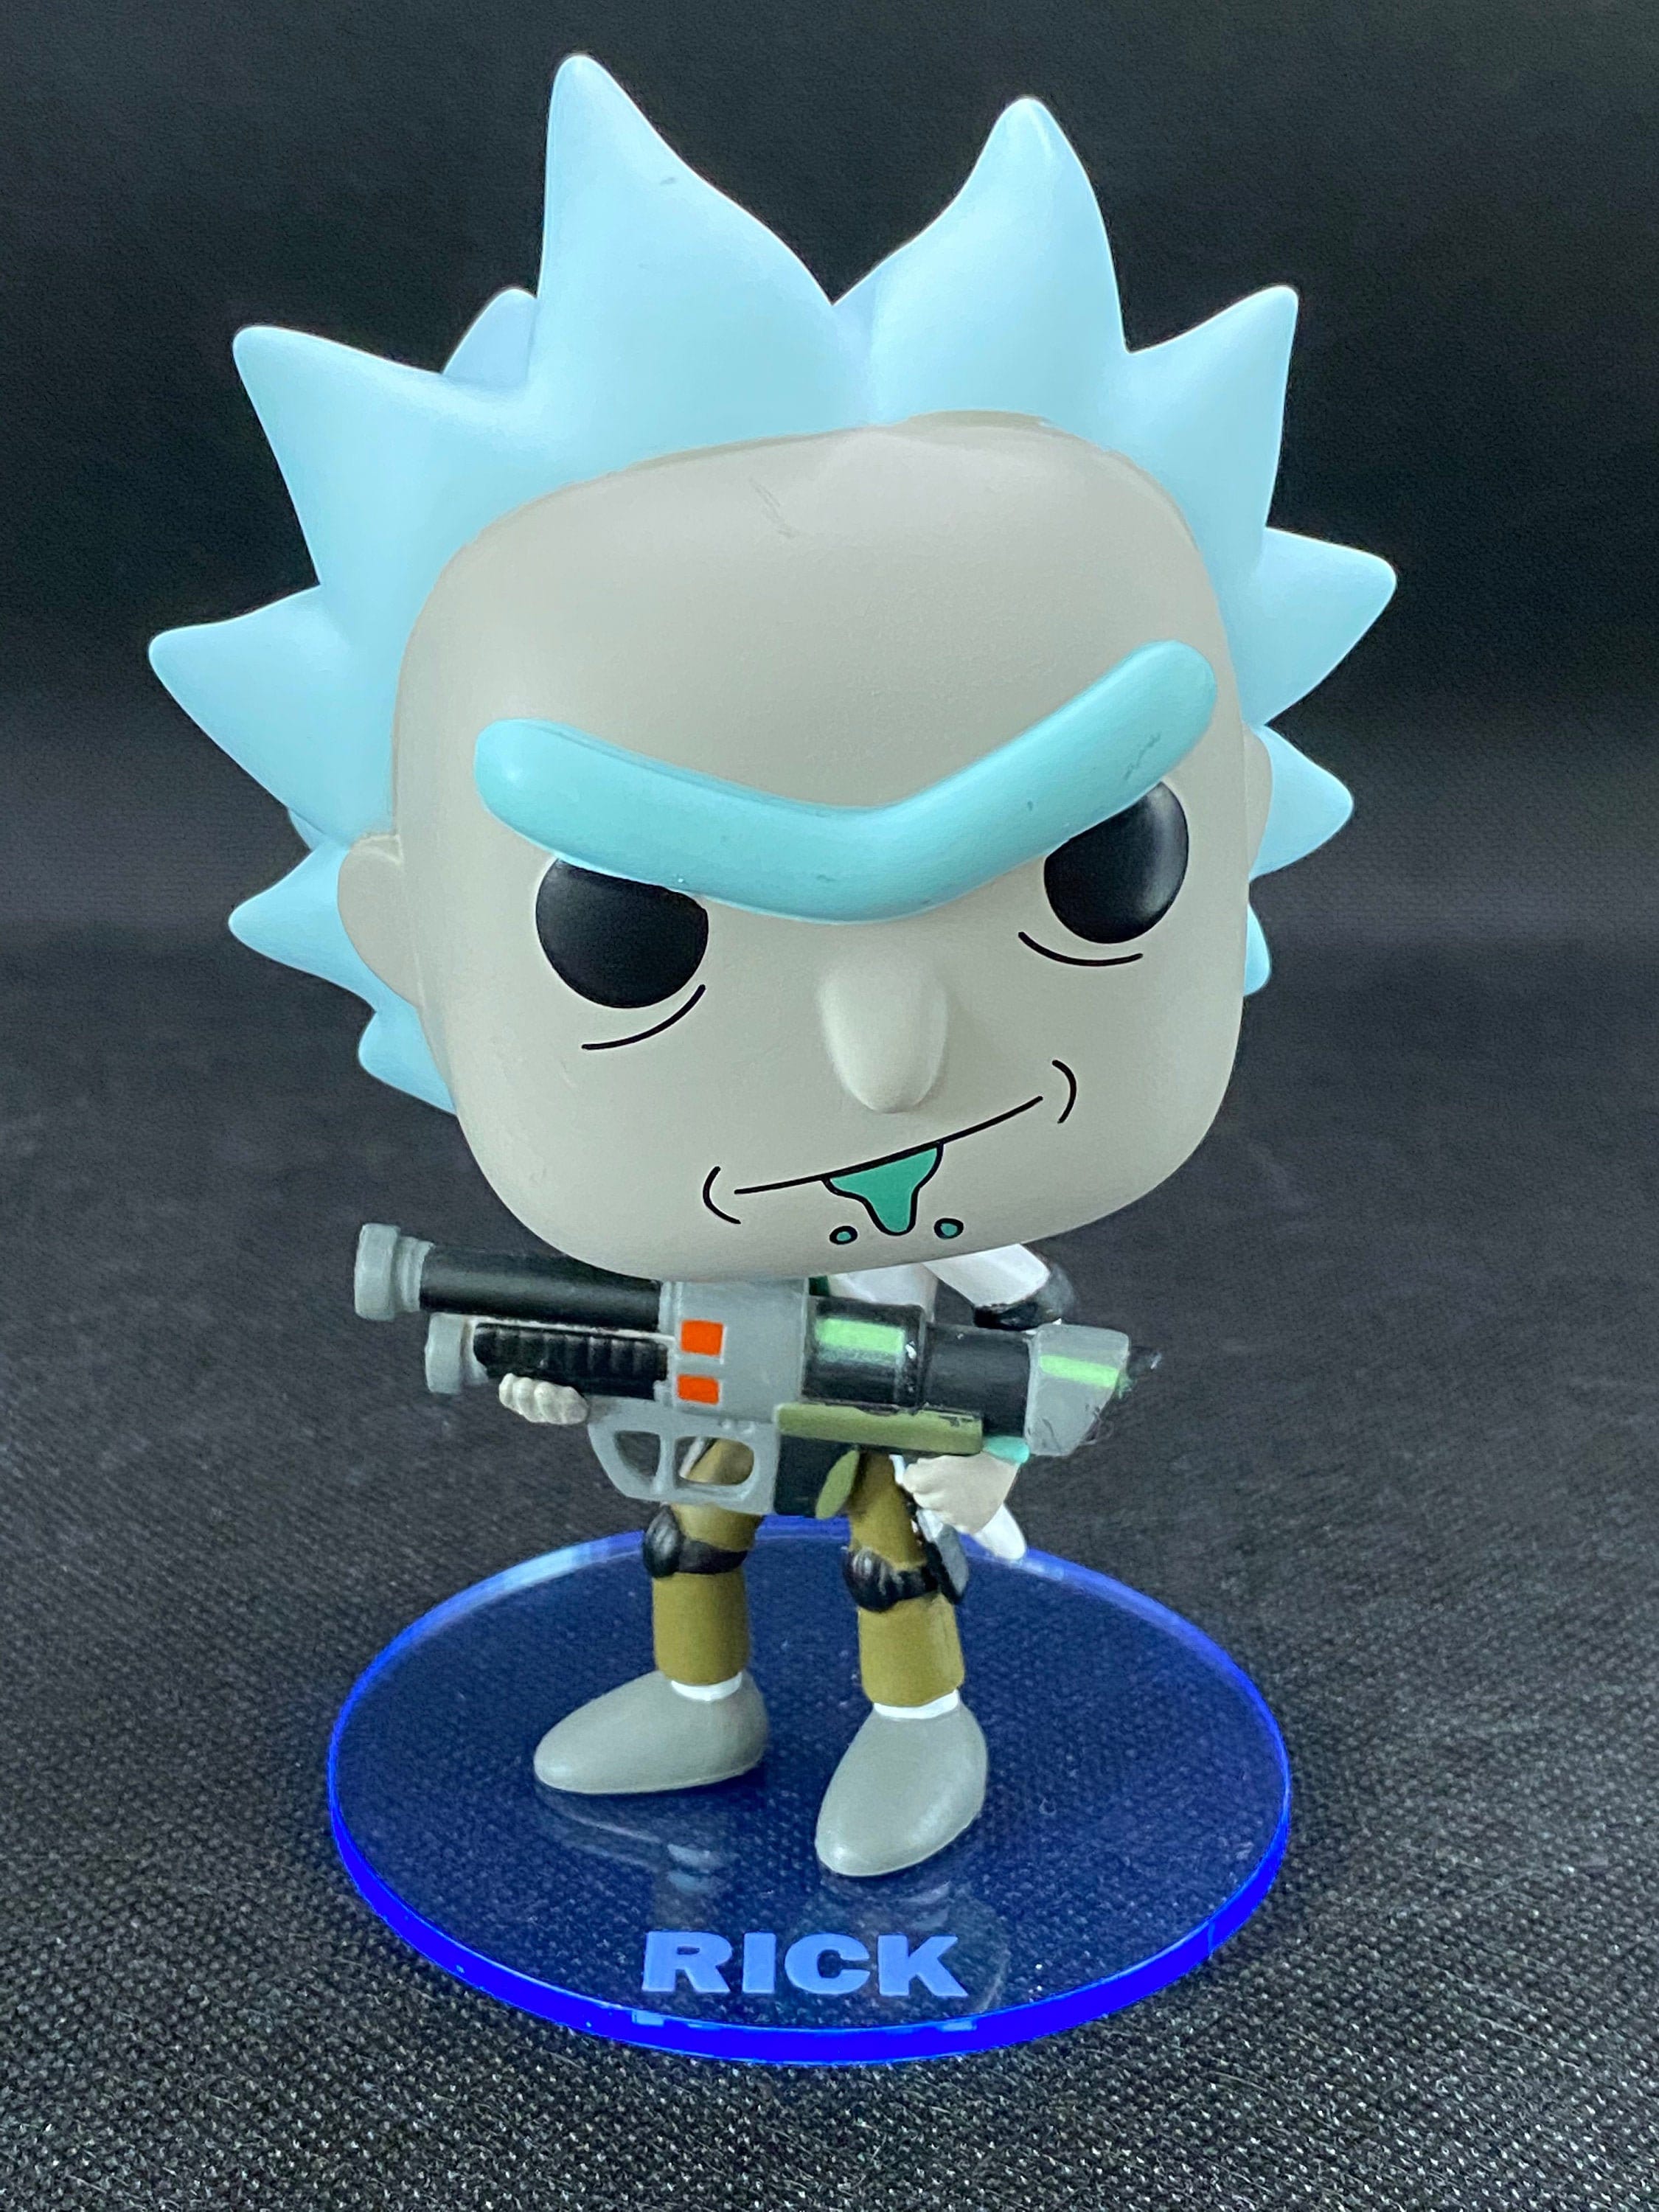 12439 "Weaponized Rick" Rick and Morty Vinyl Toy FUNKO POP 